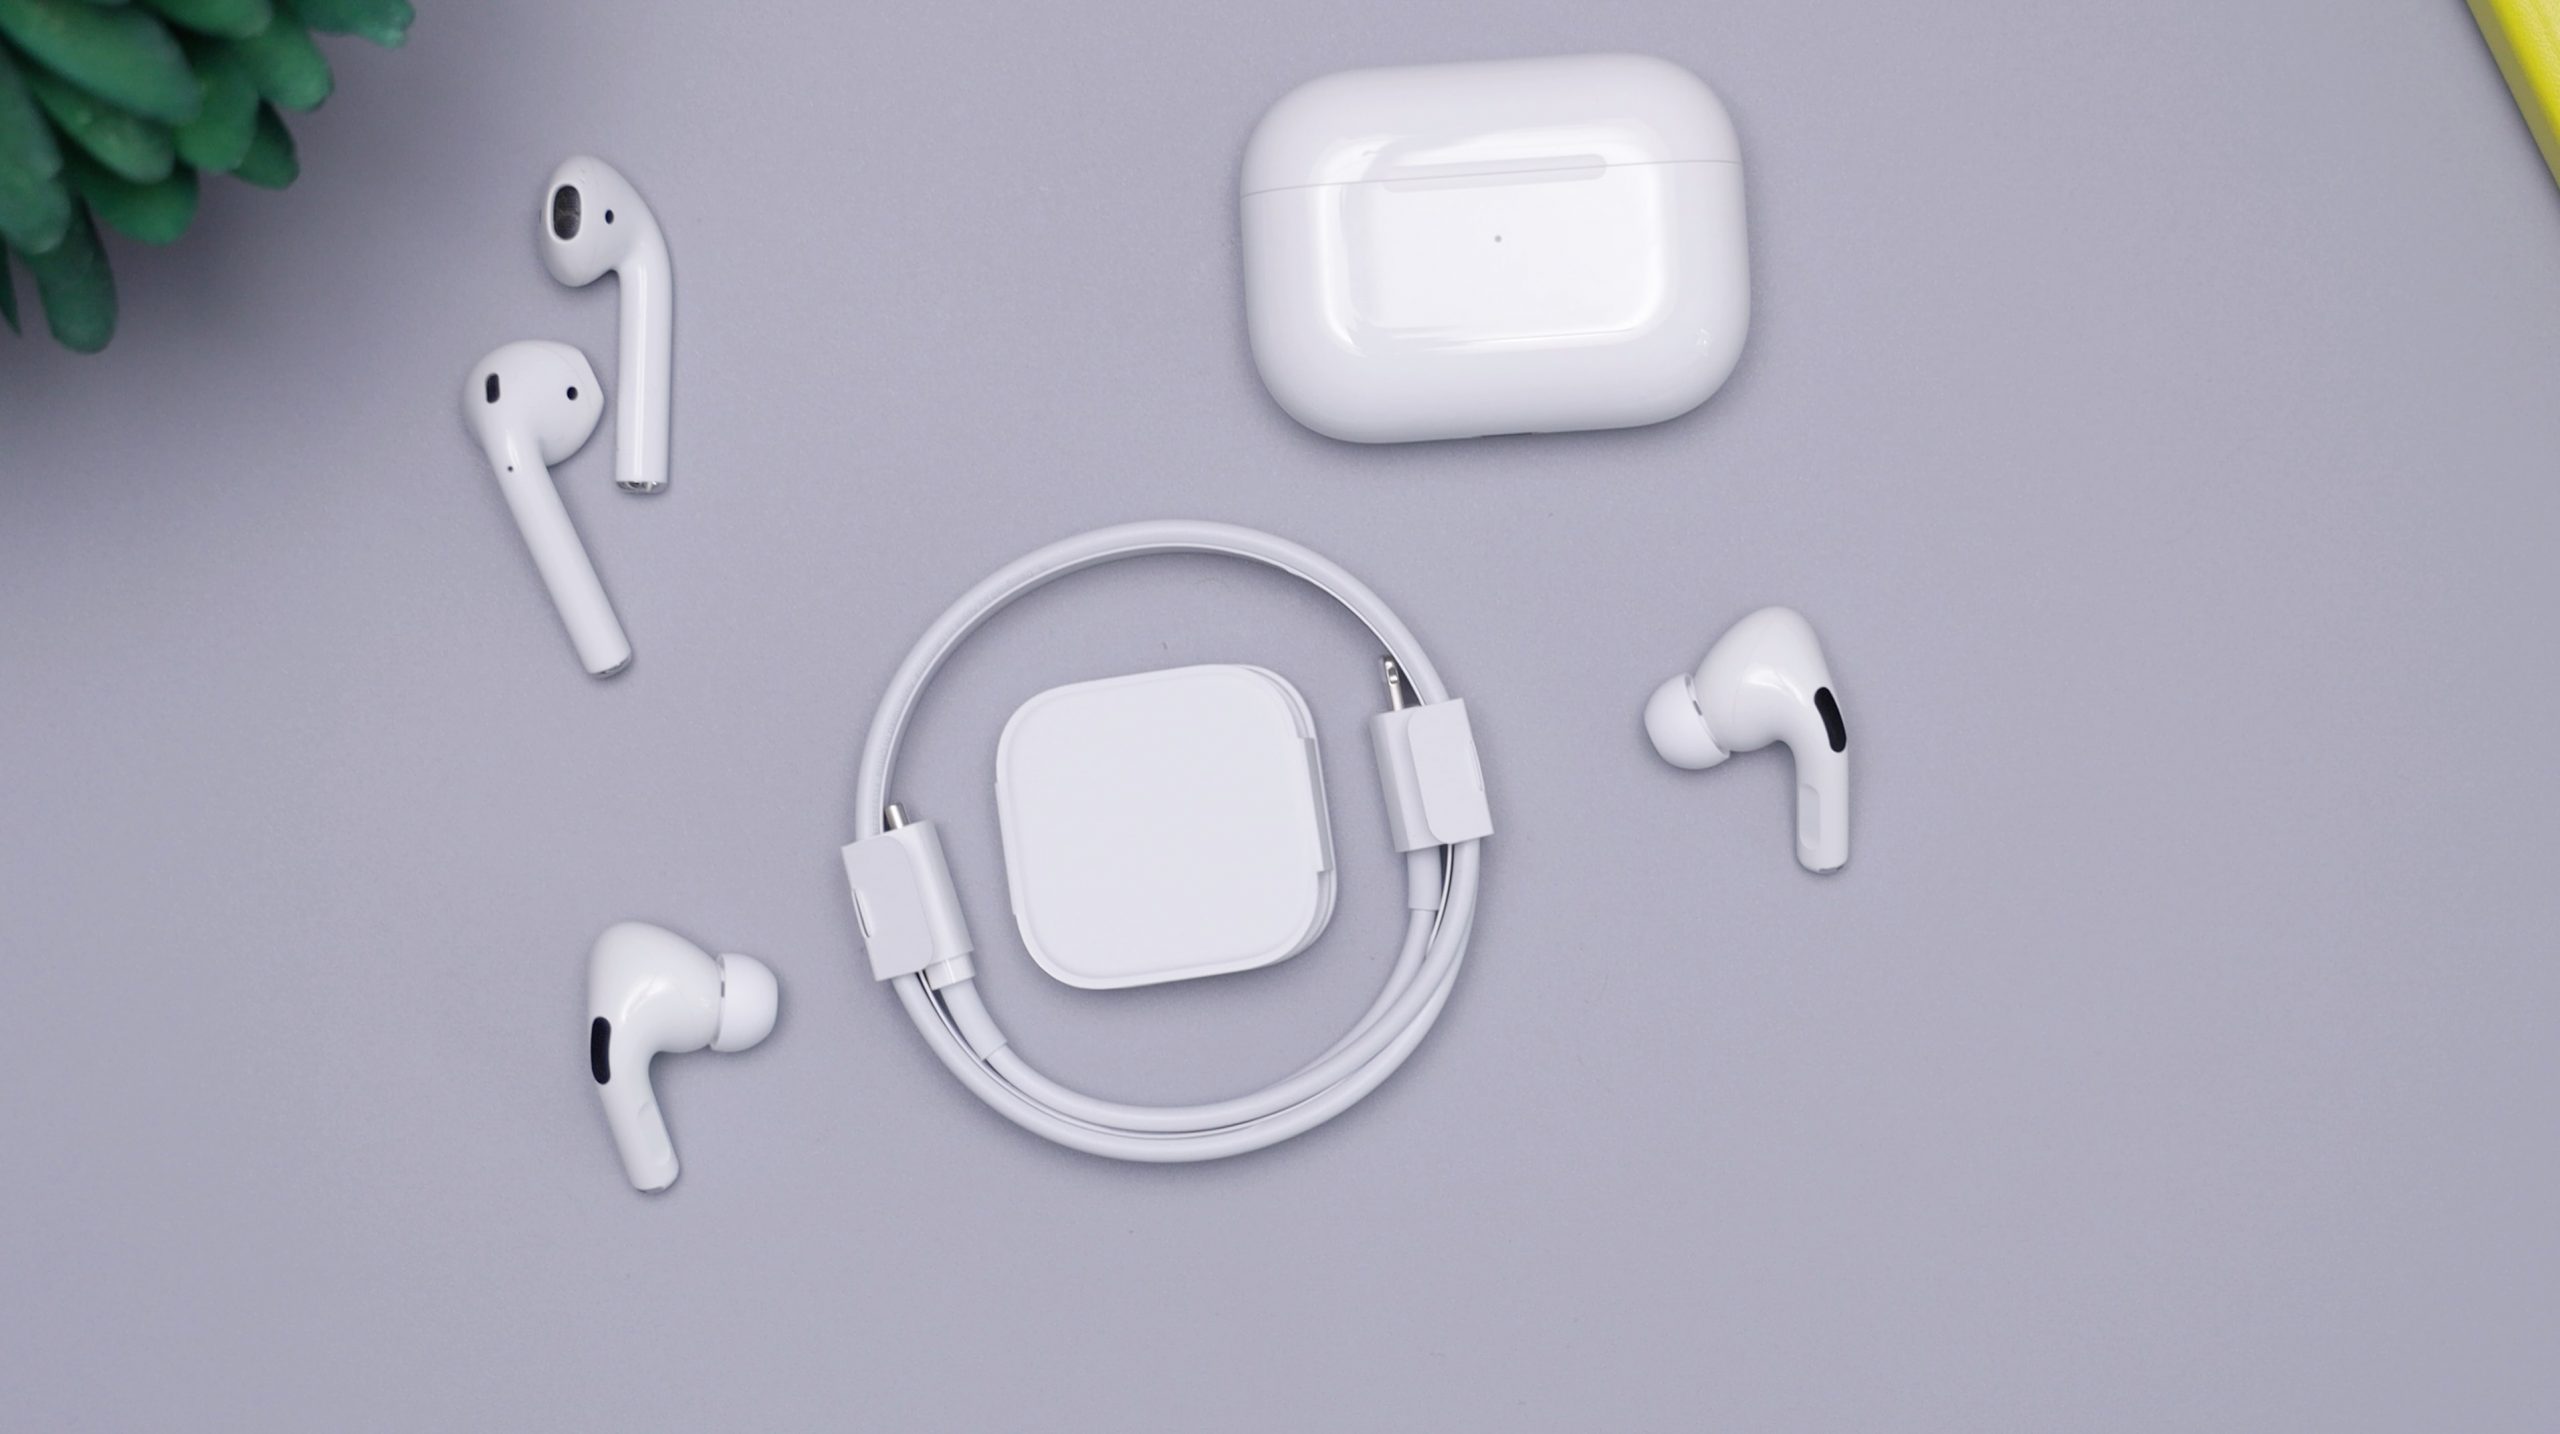 Get Apple AirPods for as little as $119 for Prime Day